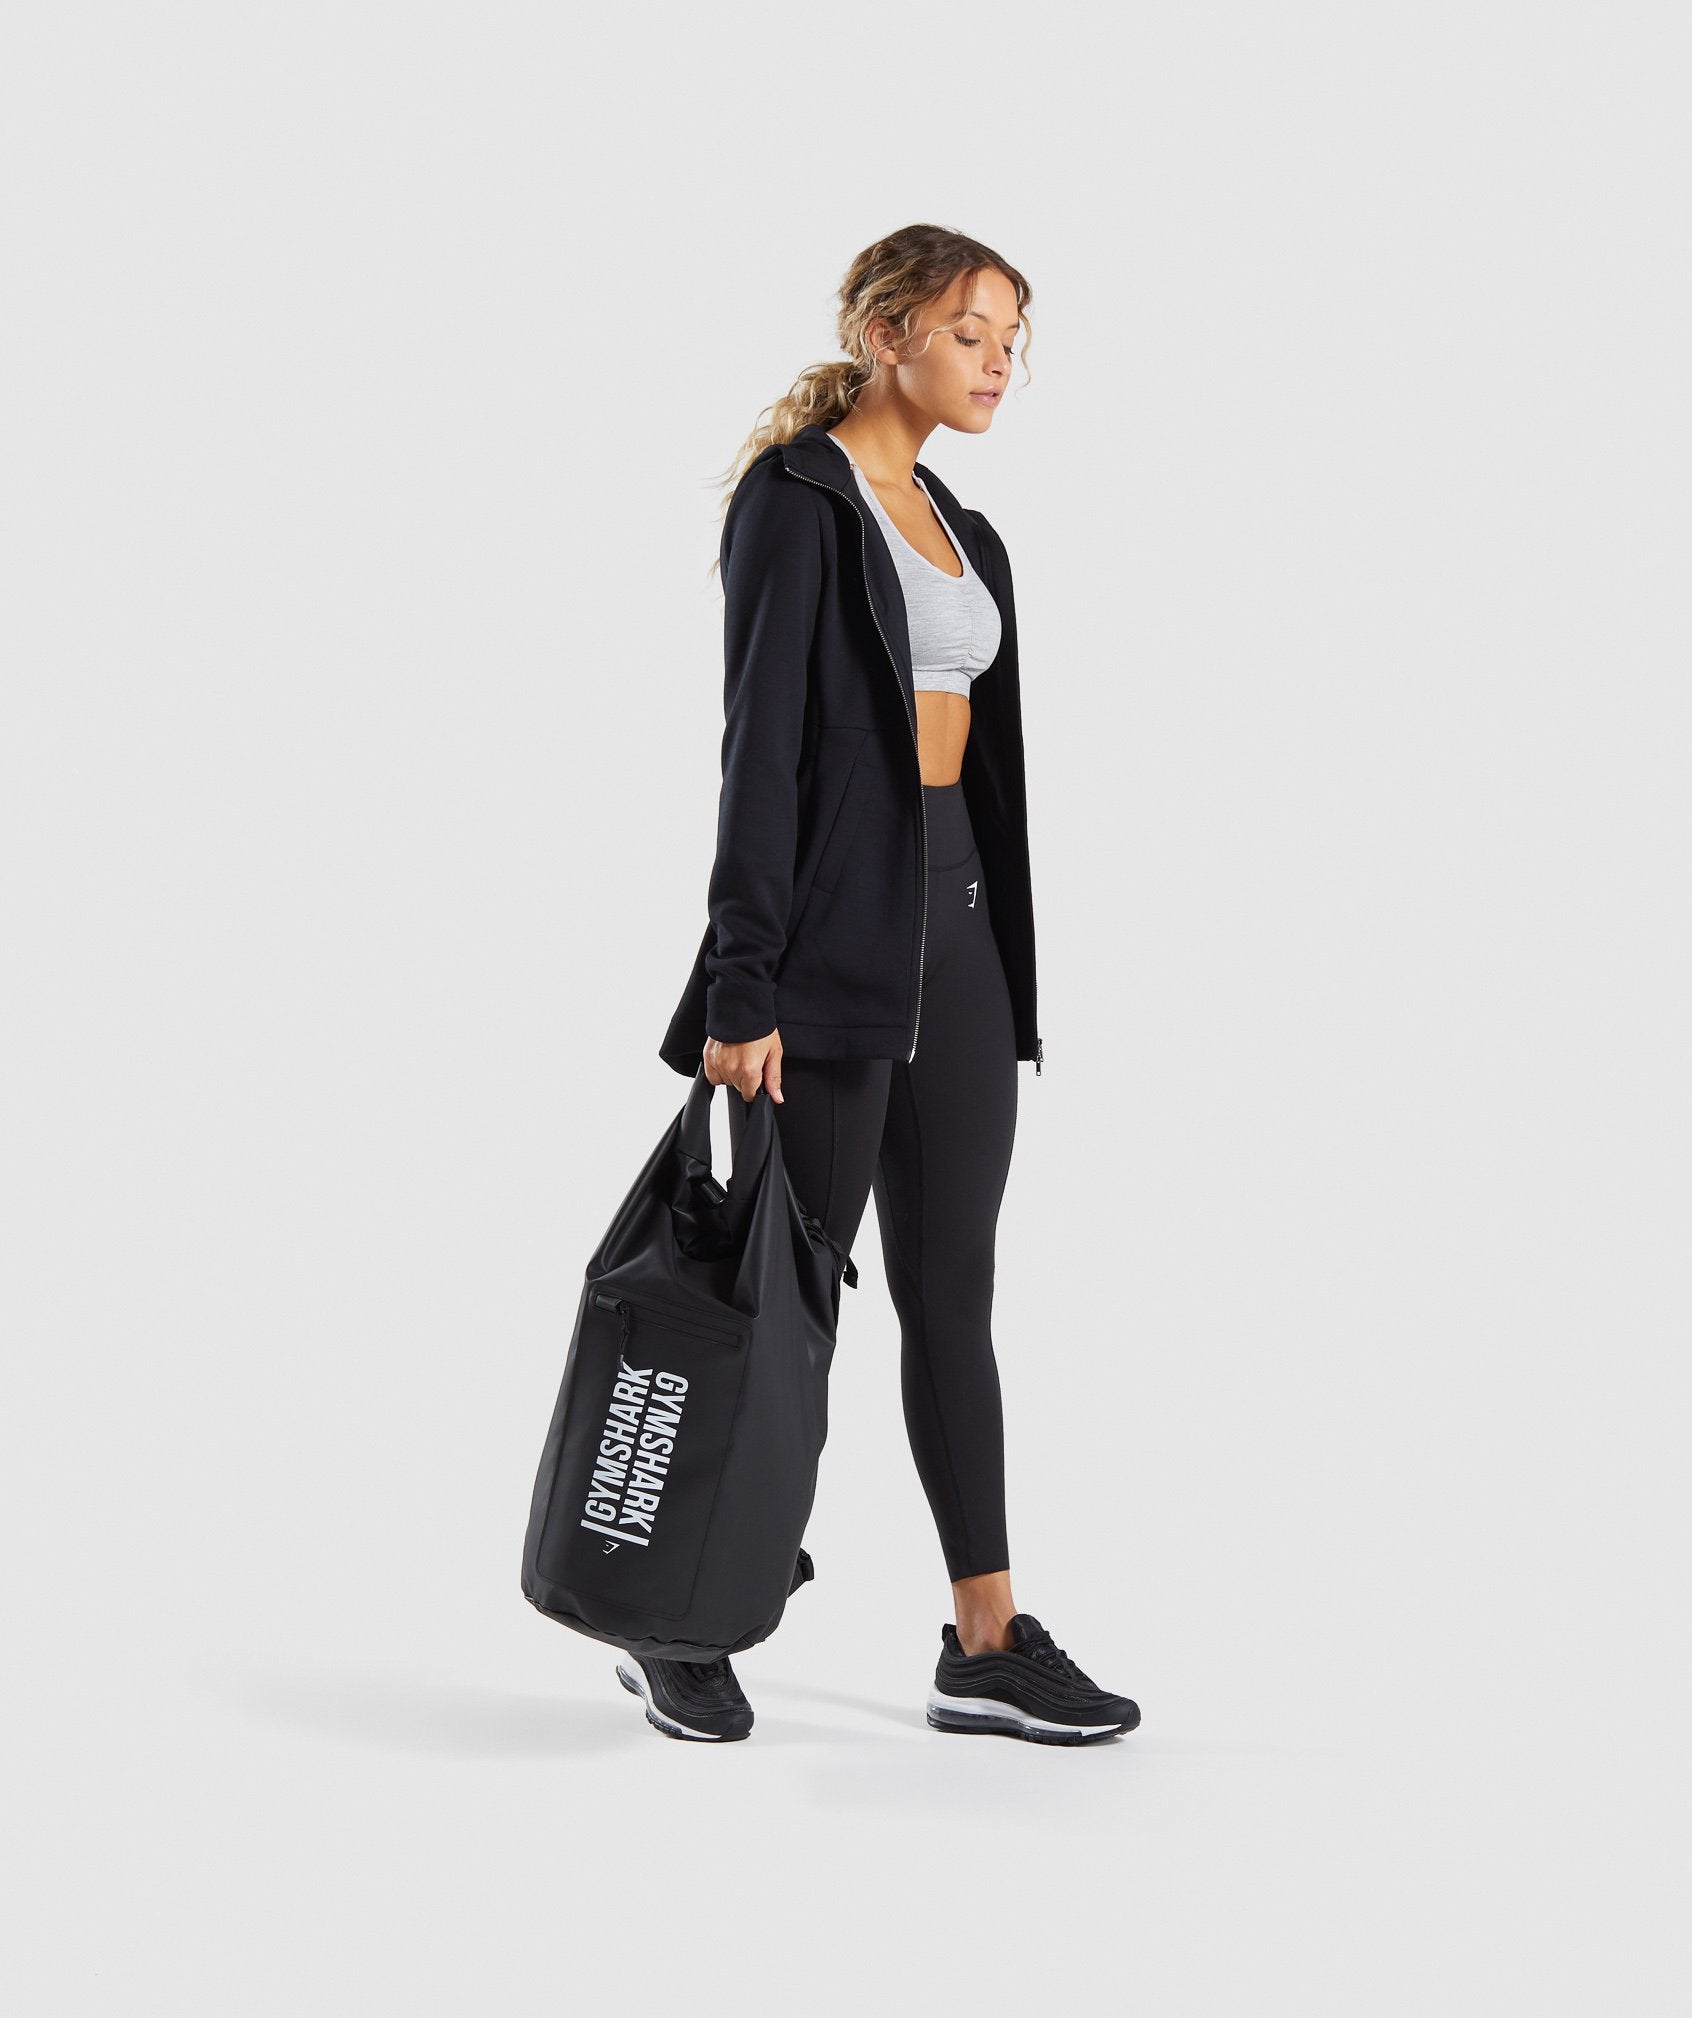 The Statement Backpack in Black - view 4